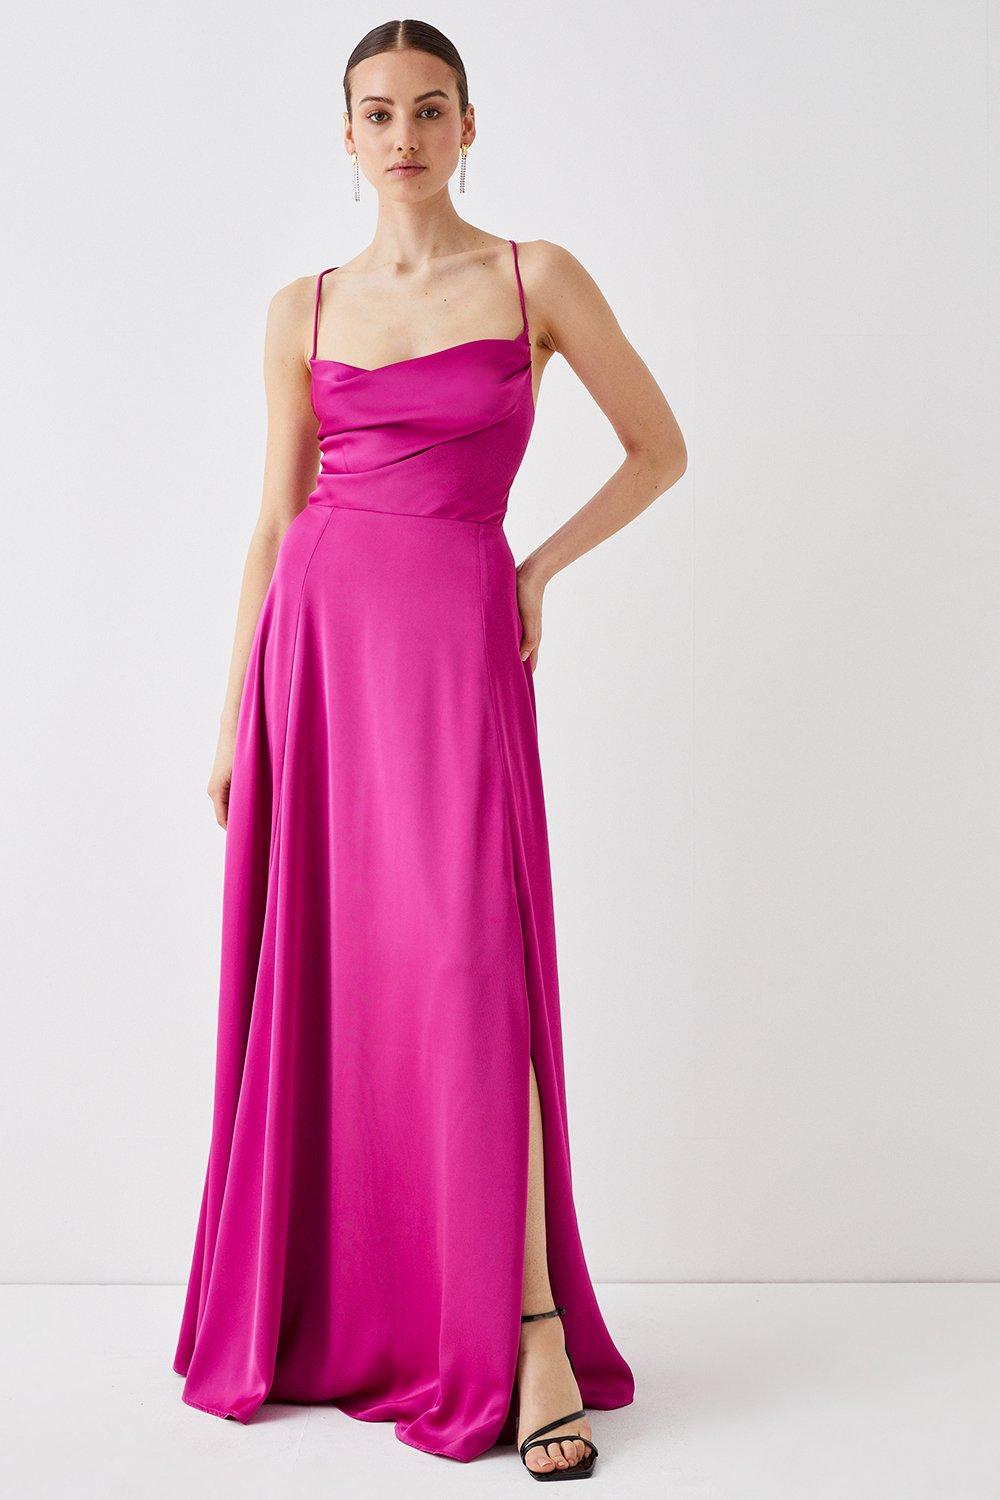 Cowl Neck Satin Maxi Prom Dress With Strappy Back